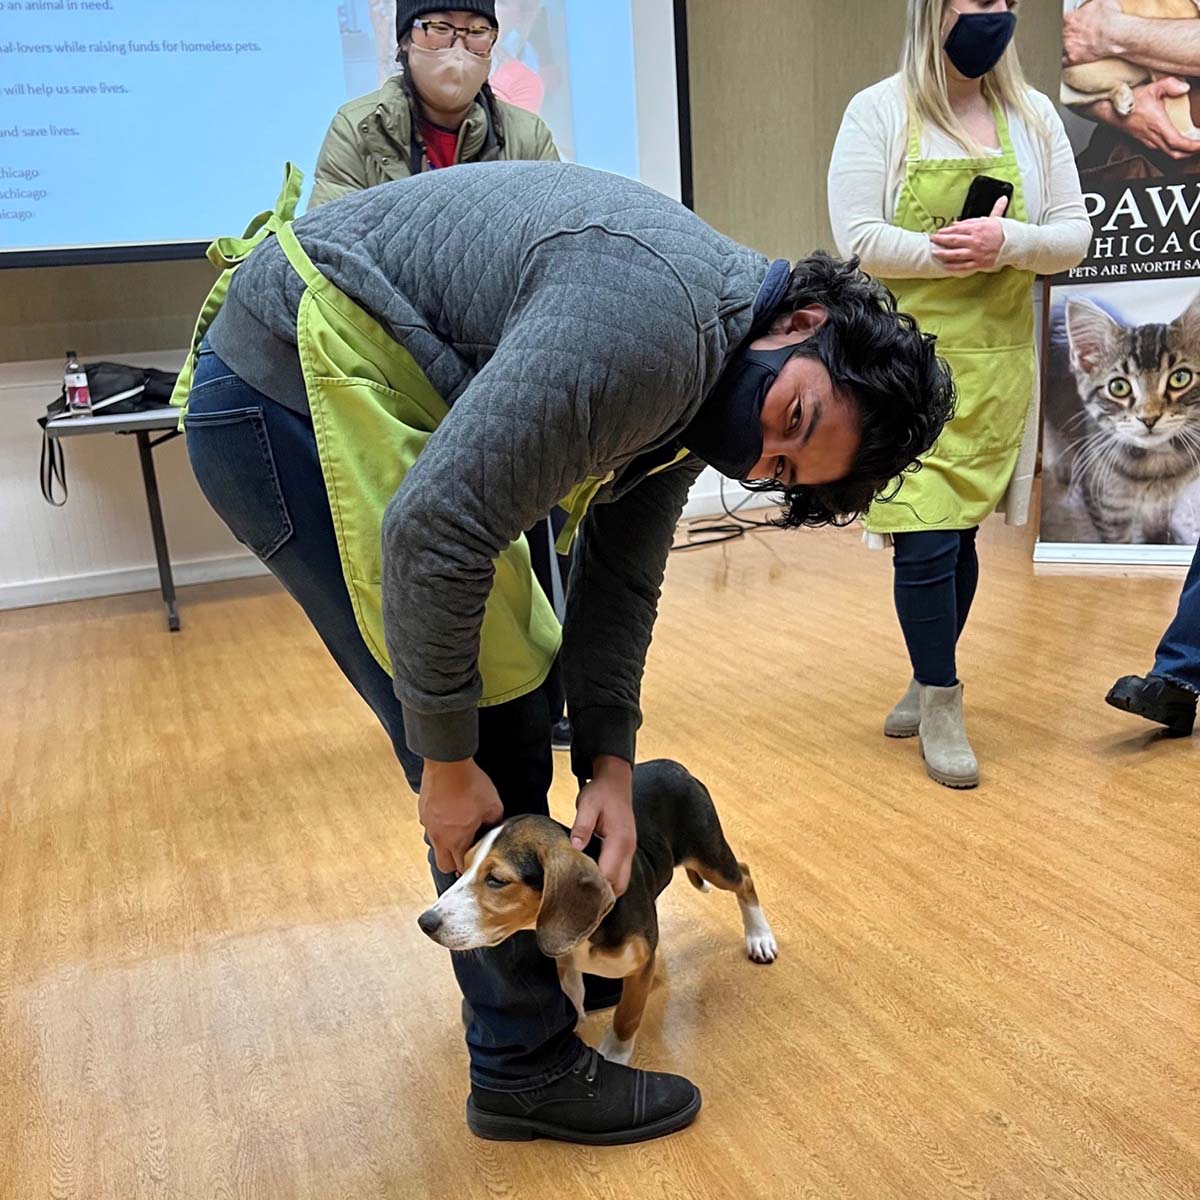 Devin Gomez, wearing a black mask and a light green PAWS apron, bends over to pet a beagle